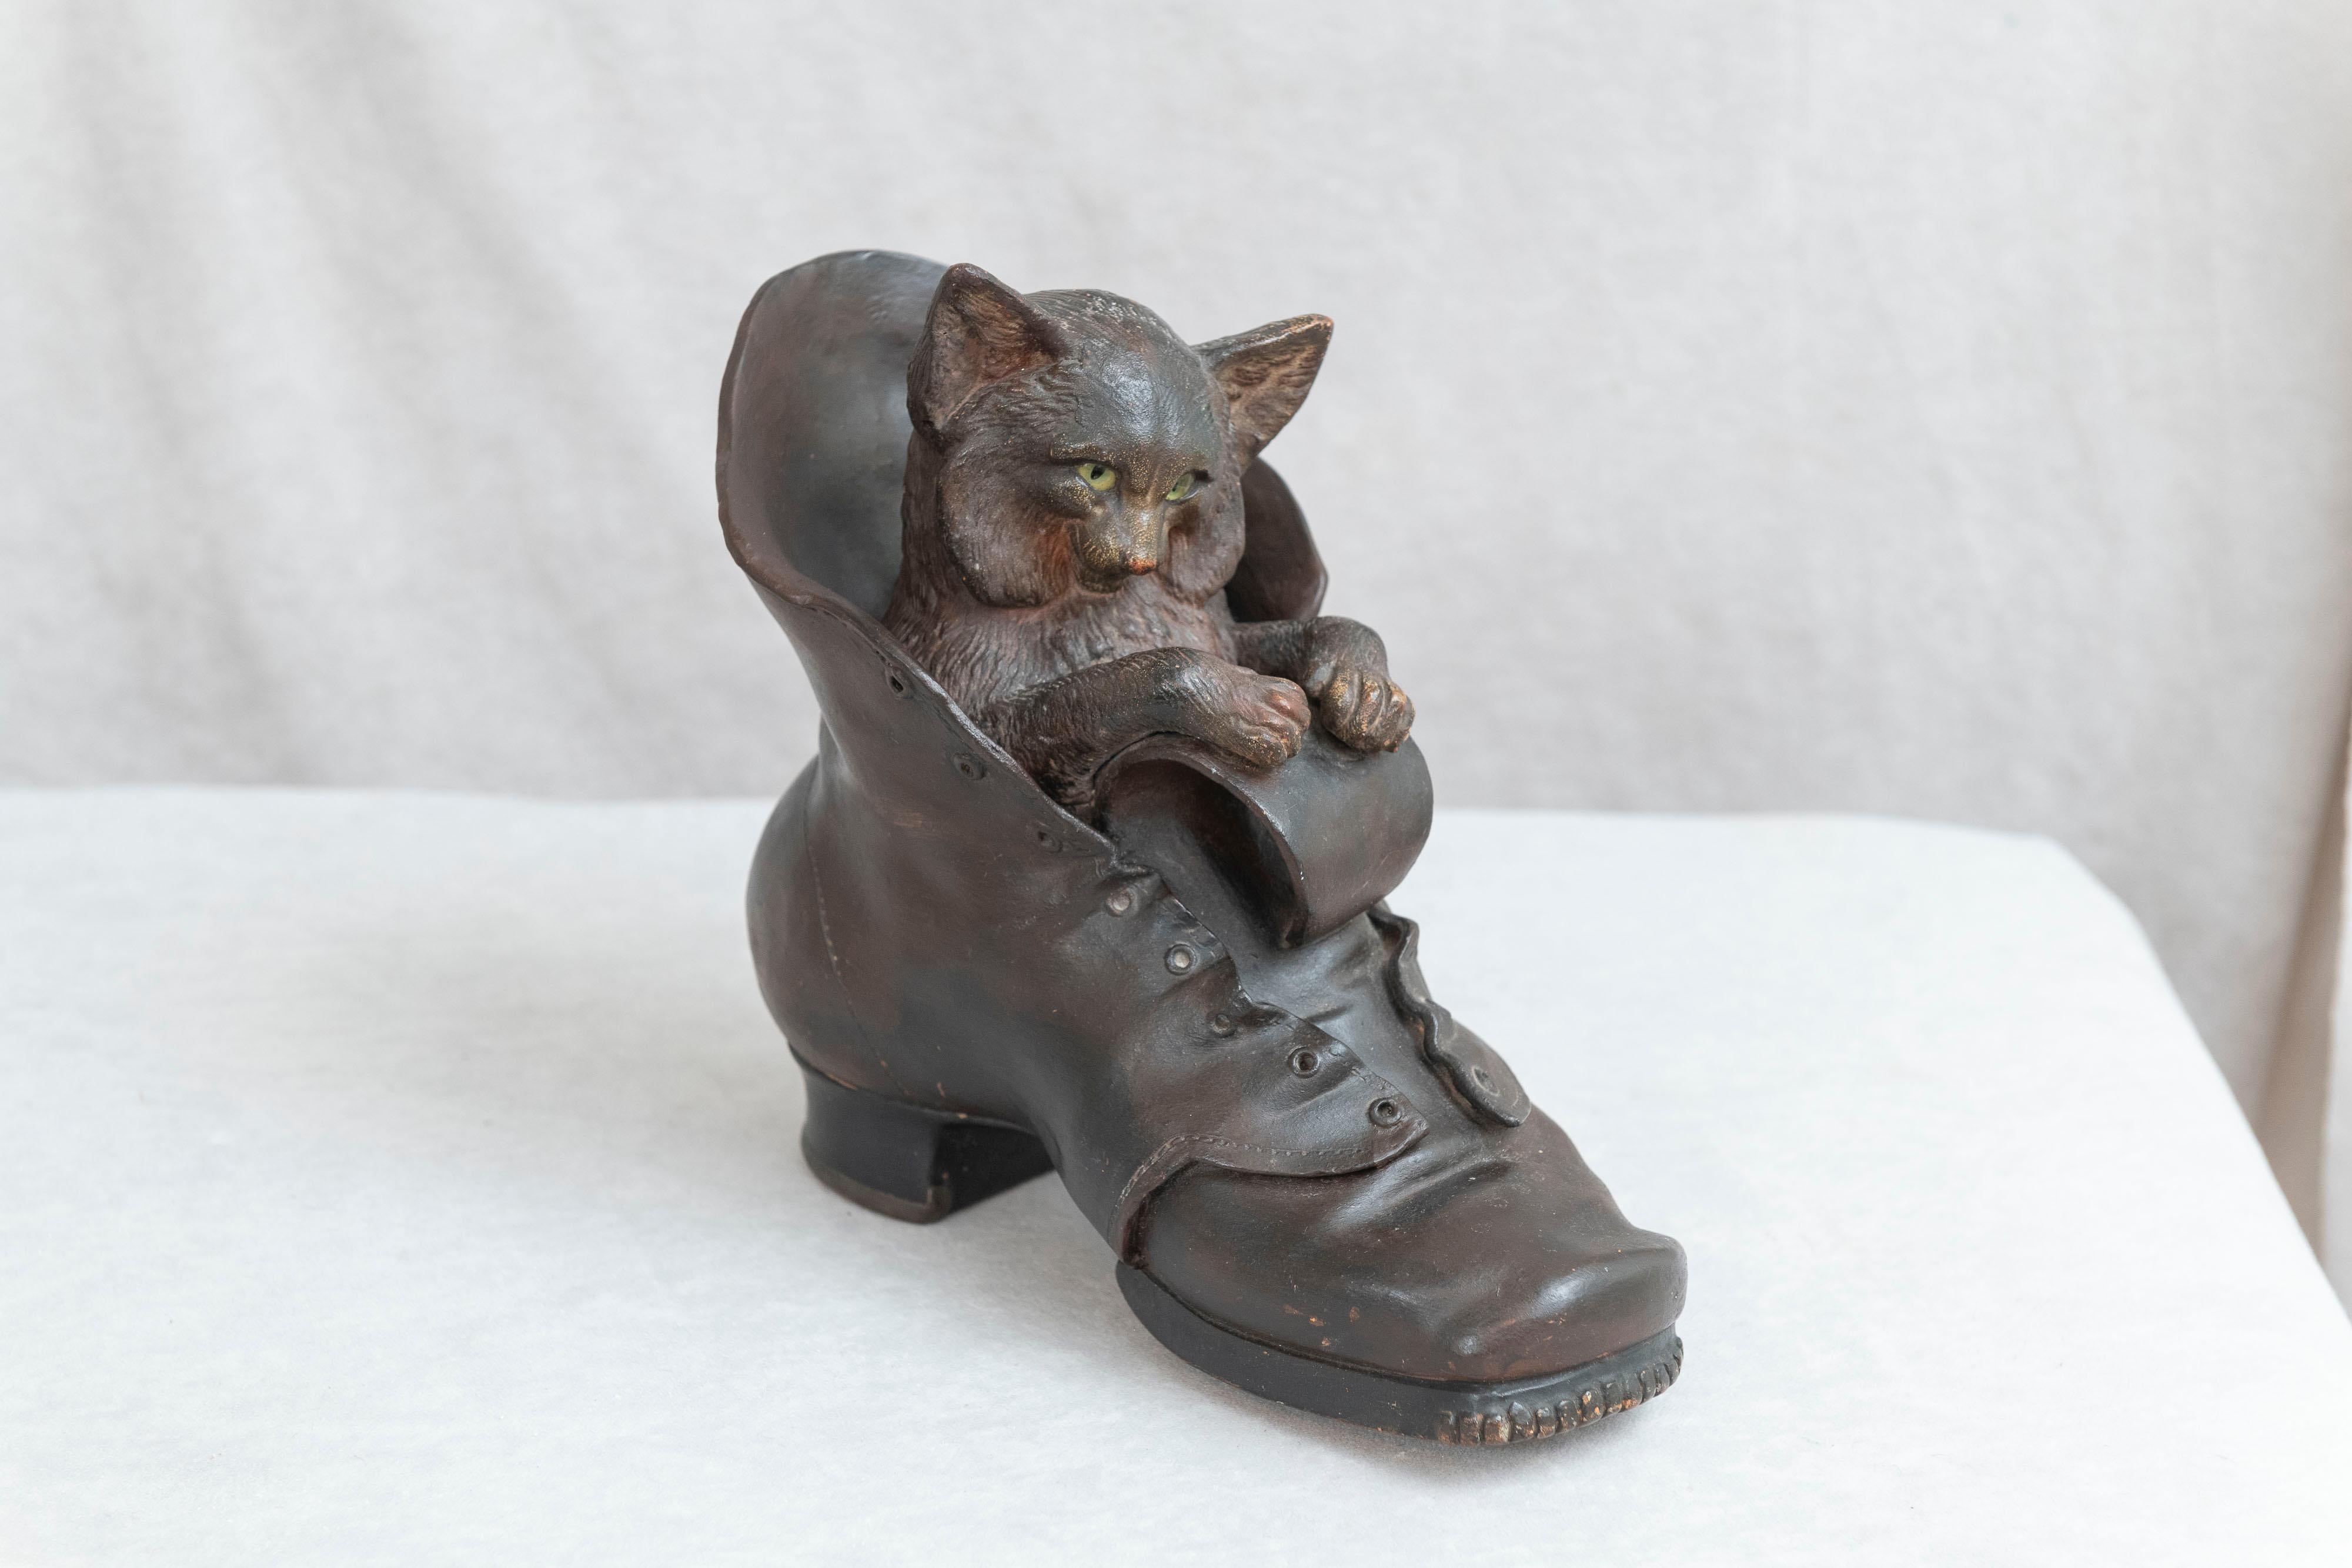 Terracotta is one of our favorite mediums. This whimsical piece of sculpture explains why we do search it out. The cat with these original glass eyes has a look that only a feline can exhibit, and the old shoe looks so real it could pass for